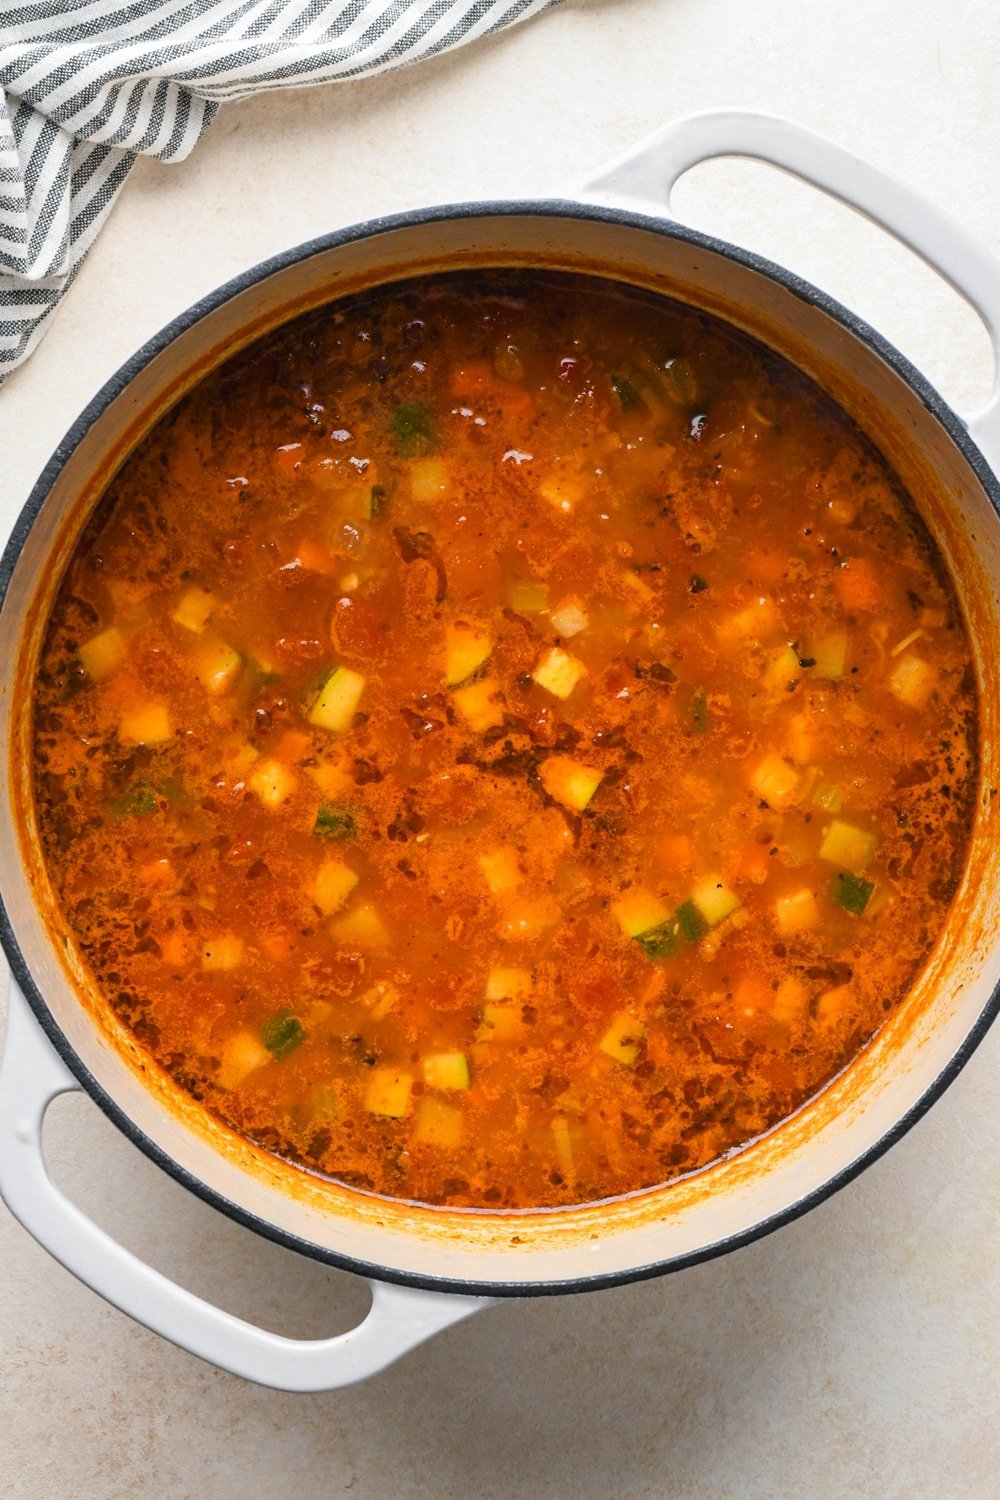 How to make Gluten Free Minestrone Soup: Broth and diced fire roasted tomatoes in the soup pot with other soup ingredients after simmering.